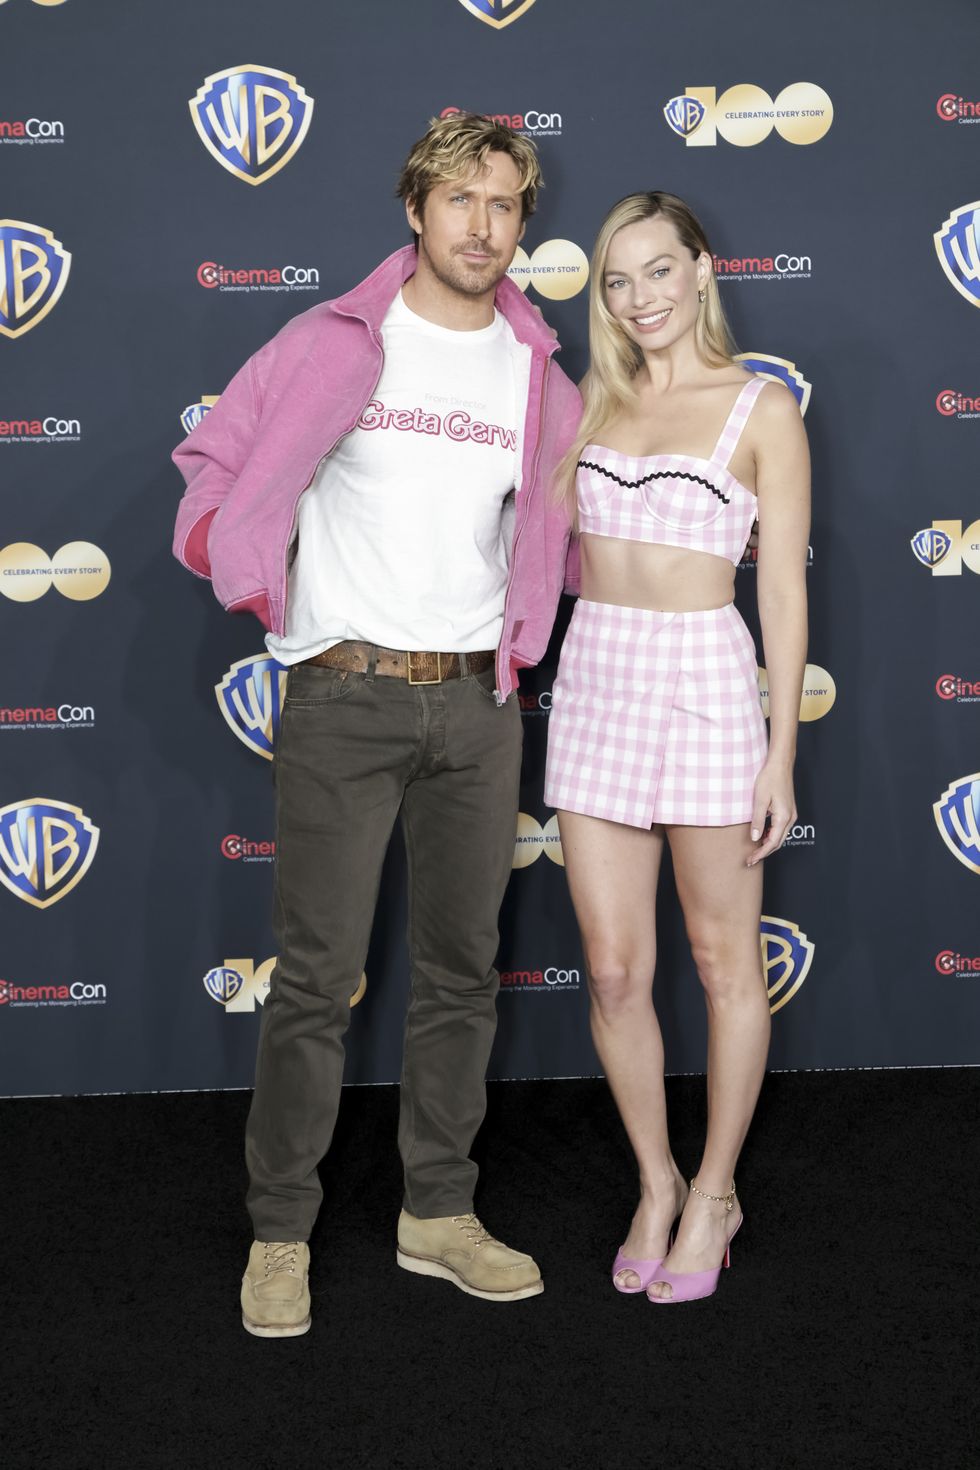 las vegas, nevada april 25 l r ryan gosling and margo robbie attend the red carpet promoting the upcoming film barbie at the warner bros pictures studio presentation during cinemacon, the official convention of the national association of theatre owners, at the colosseum at caesars palace on april 25, 2023 in las vegas, nevada photo by greg dohertywireimage